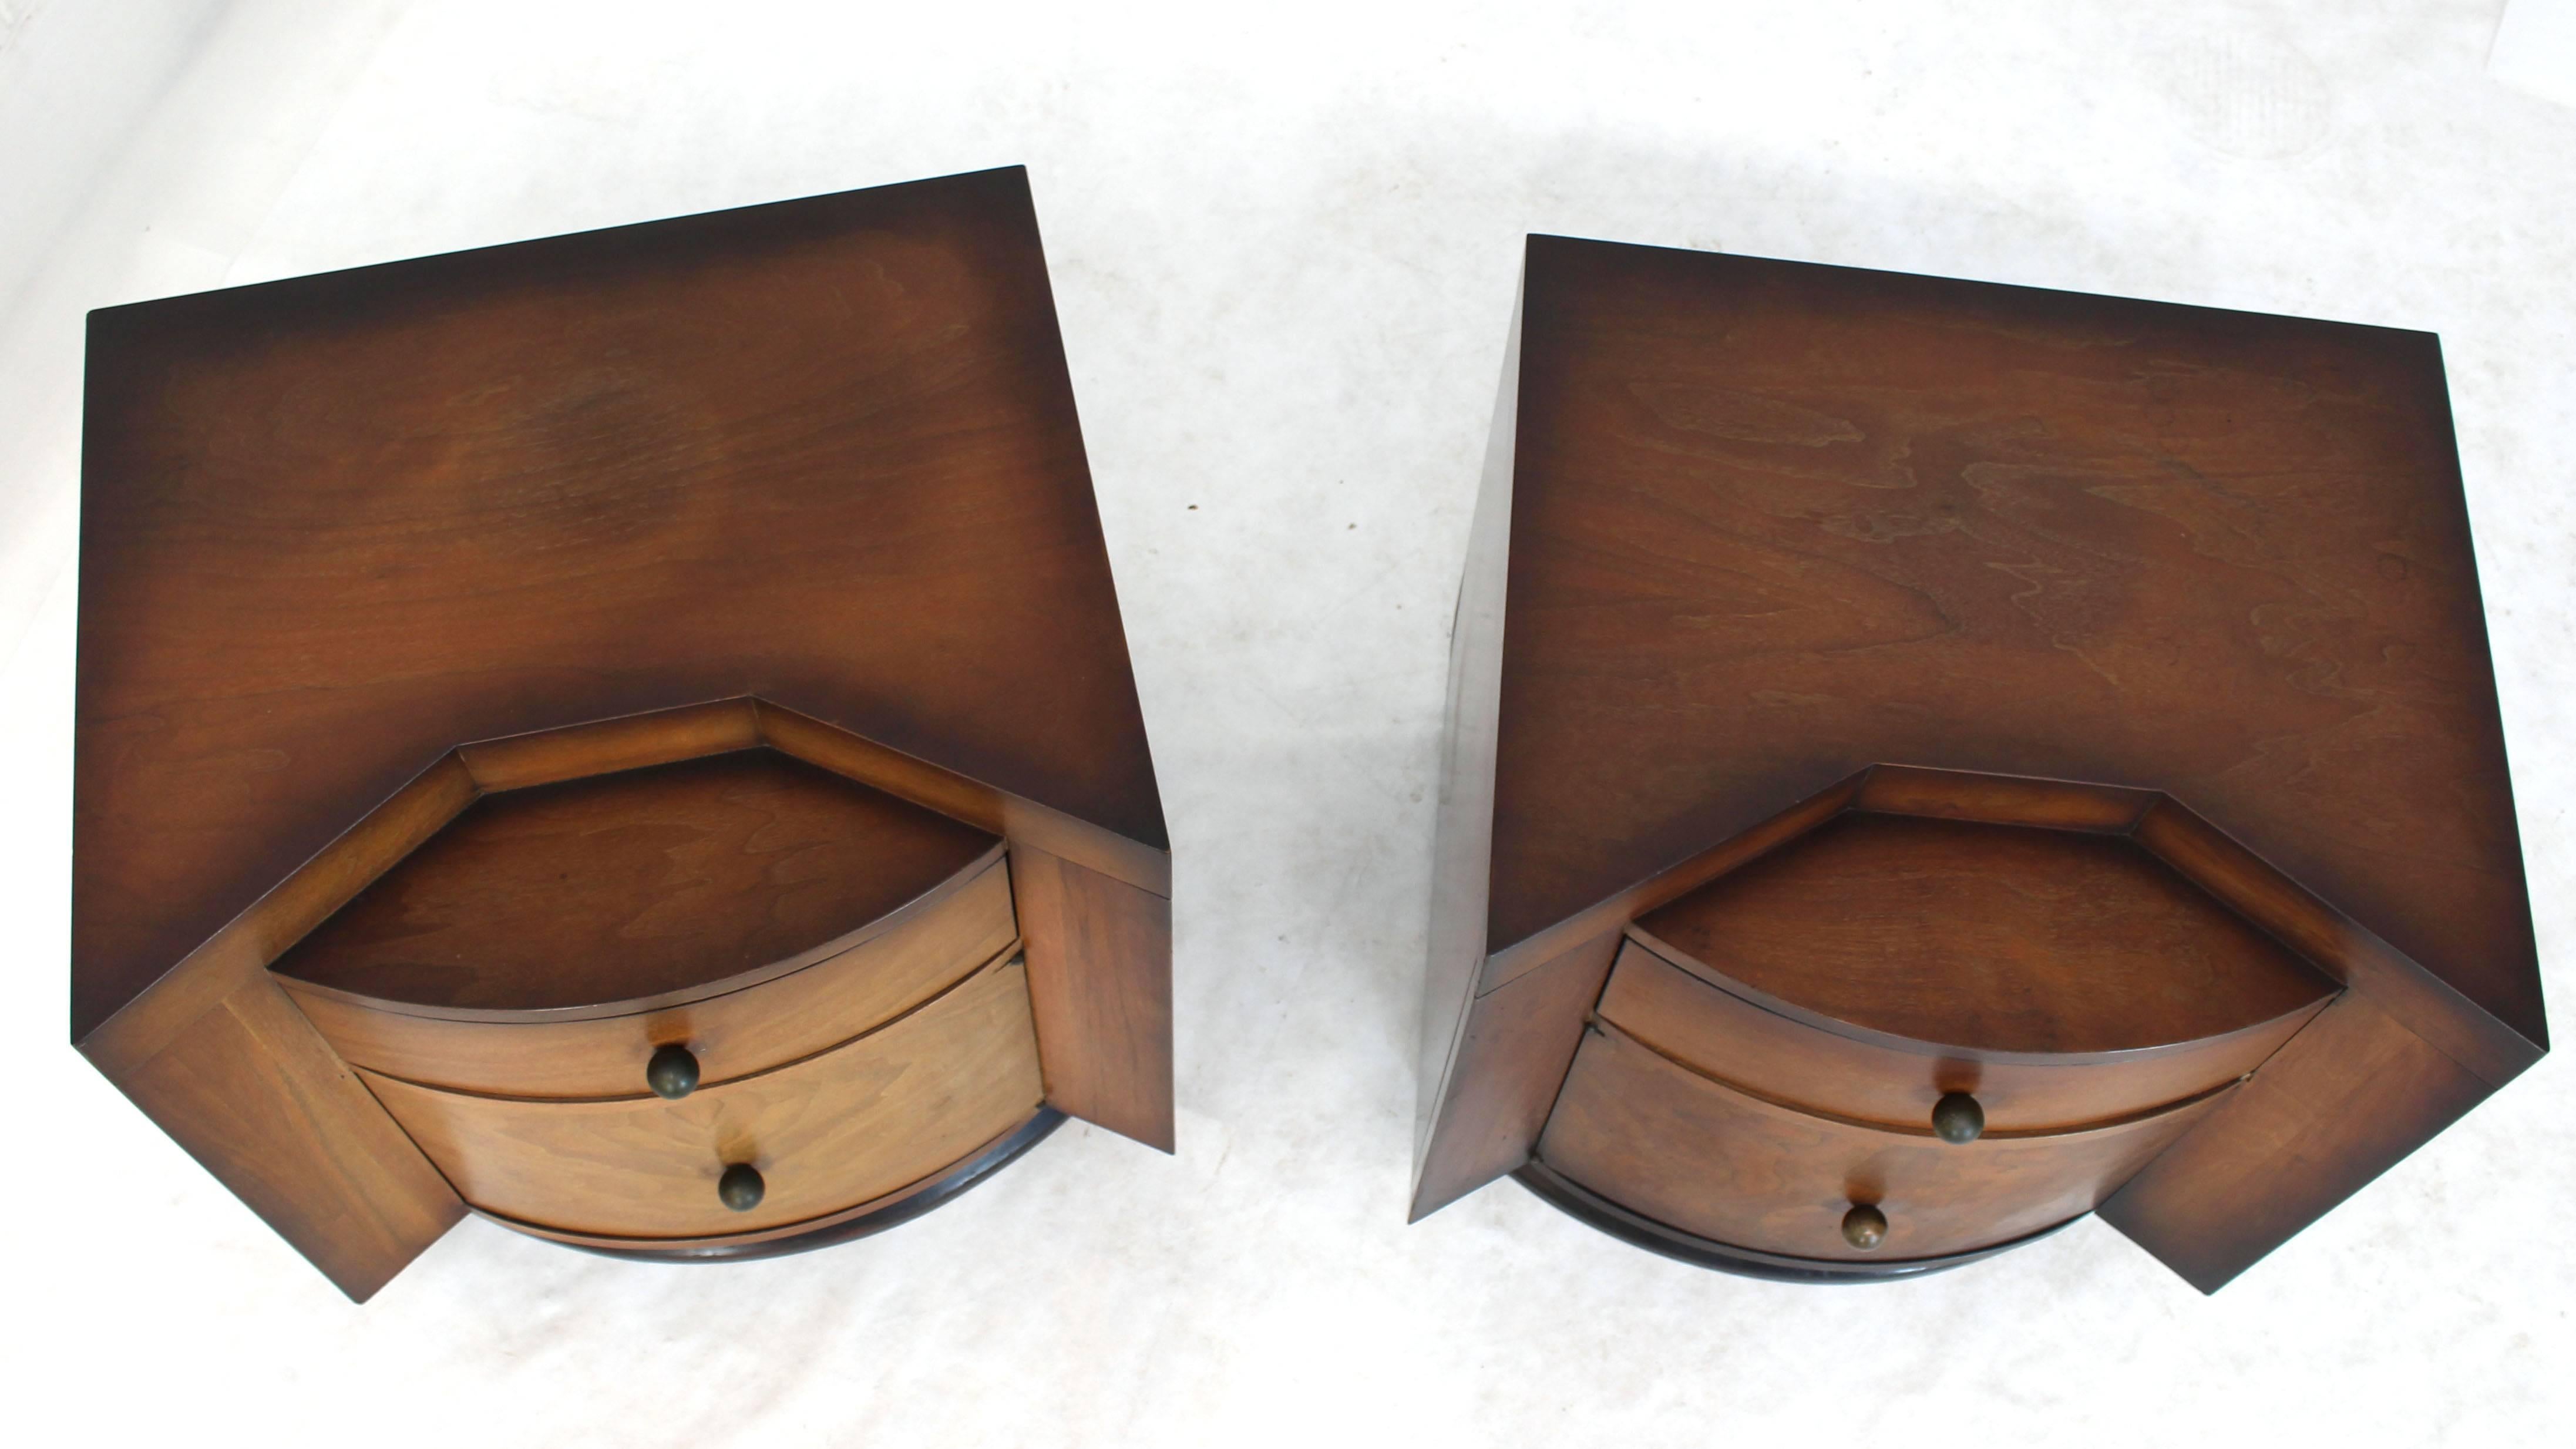 Pair of Deco Full Bodied Design Midcentury Nightstands End Tables Brass Pulls In Good Condition For Sale In Rockaway, NJ